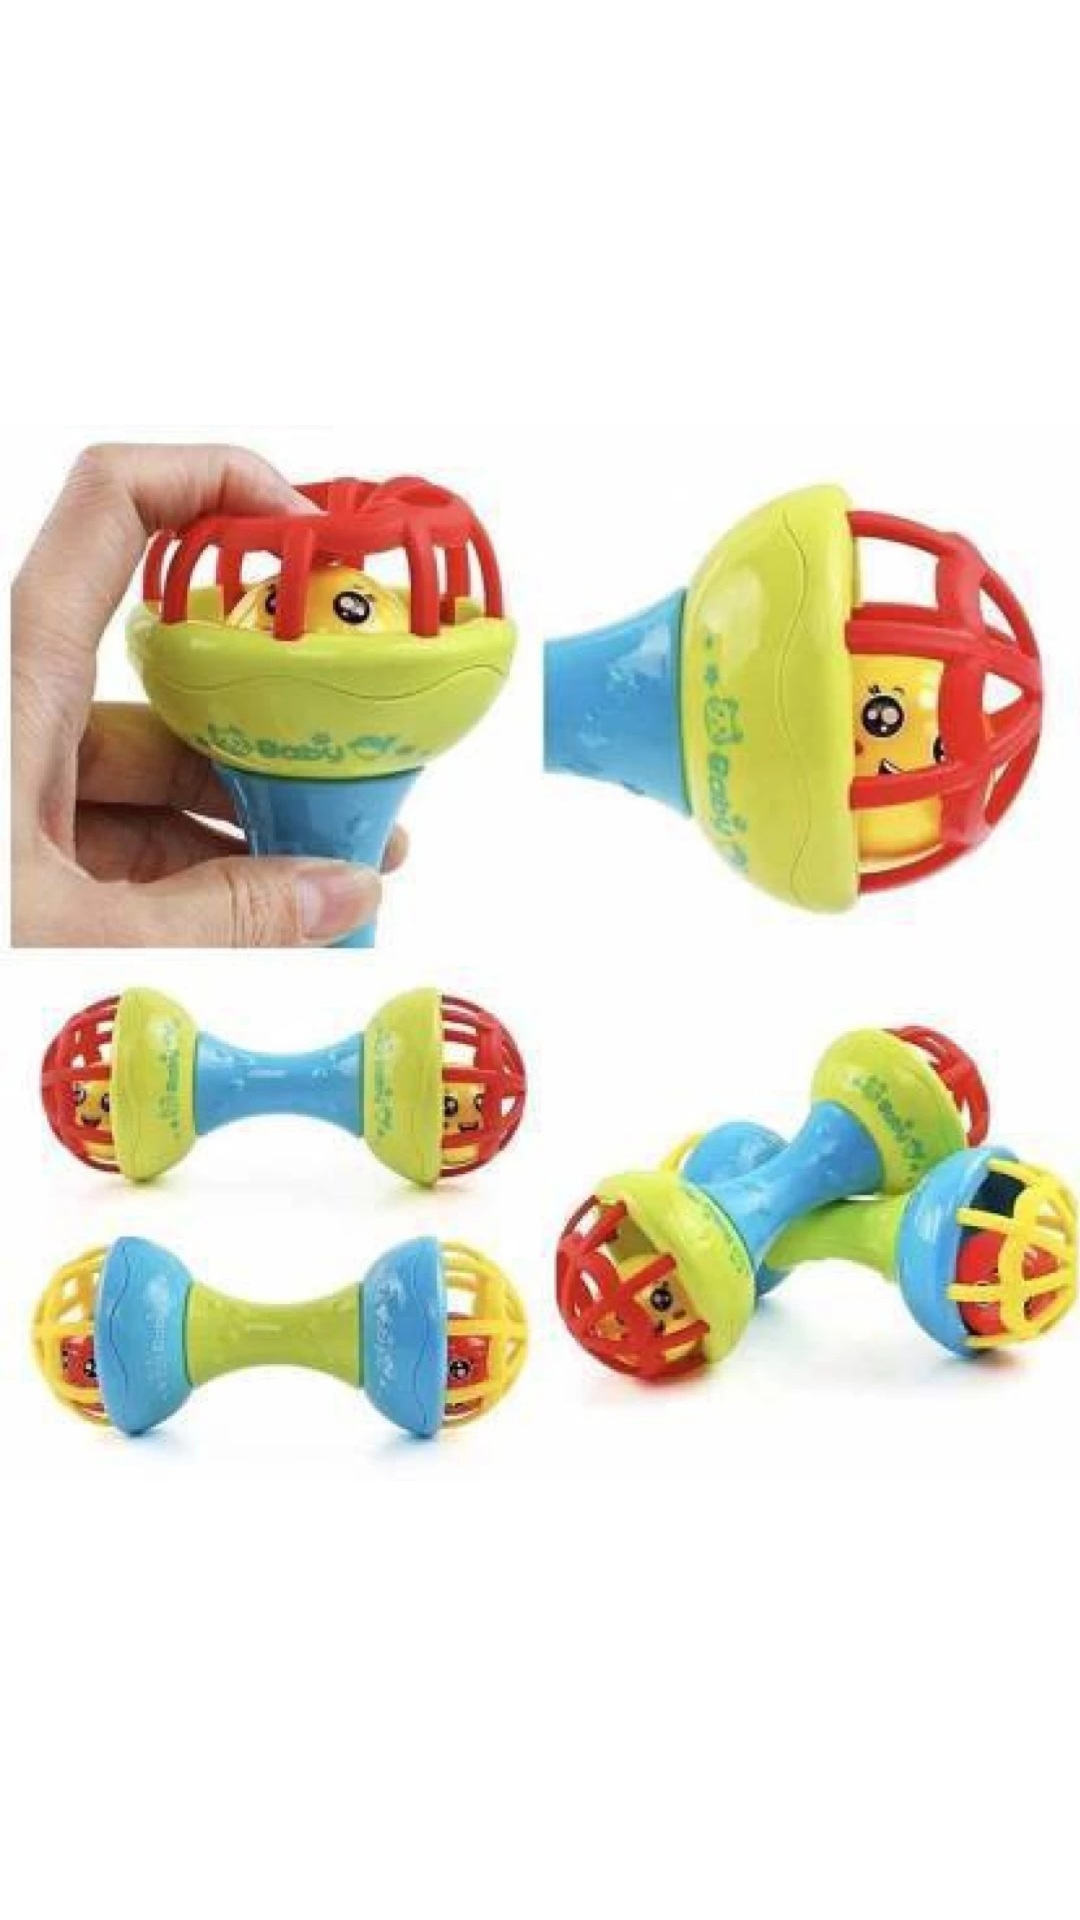 Baby born rattles hand bell dummbell with grasping gums teether